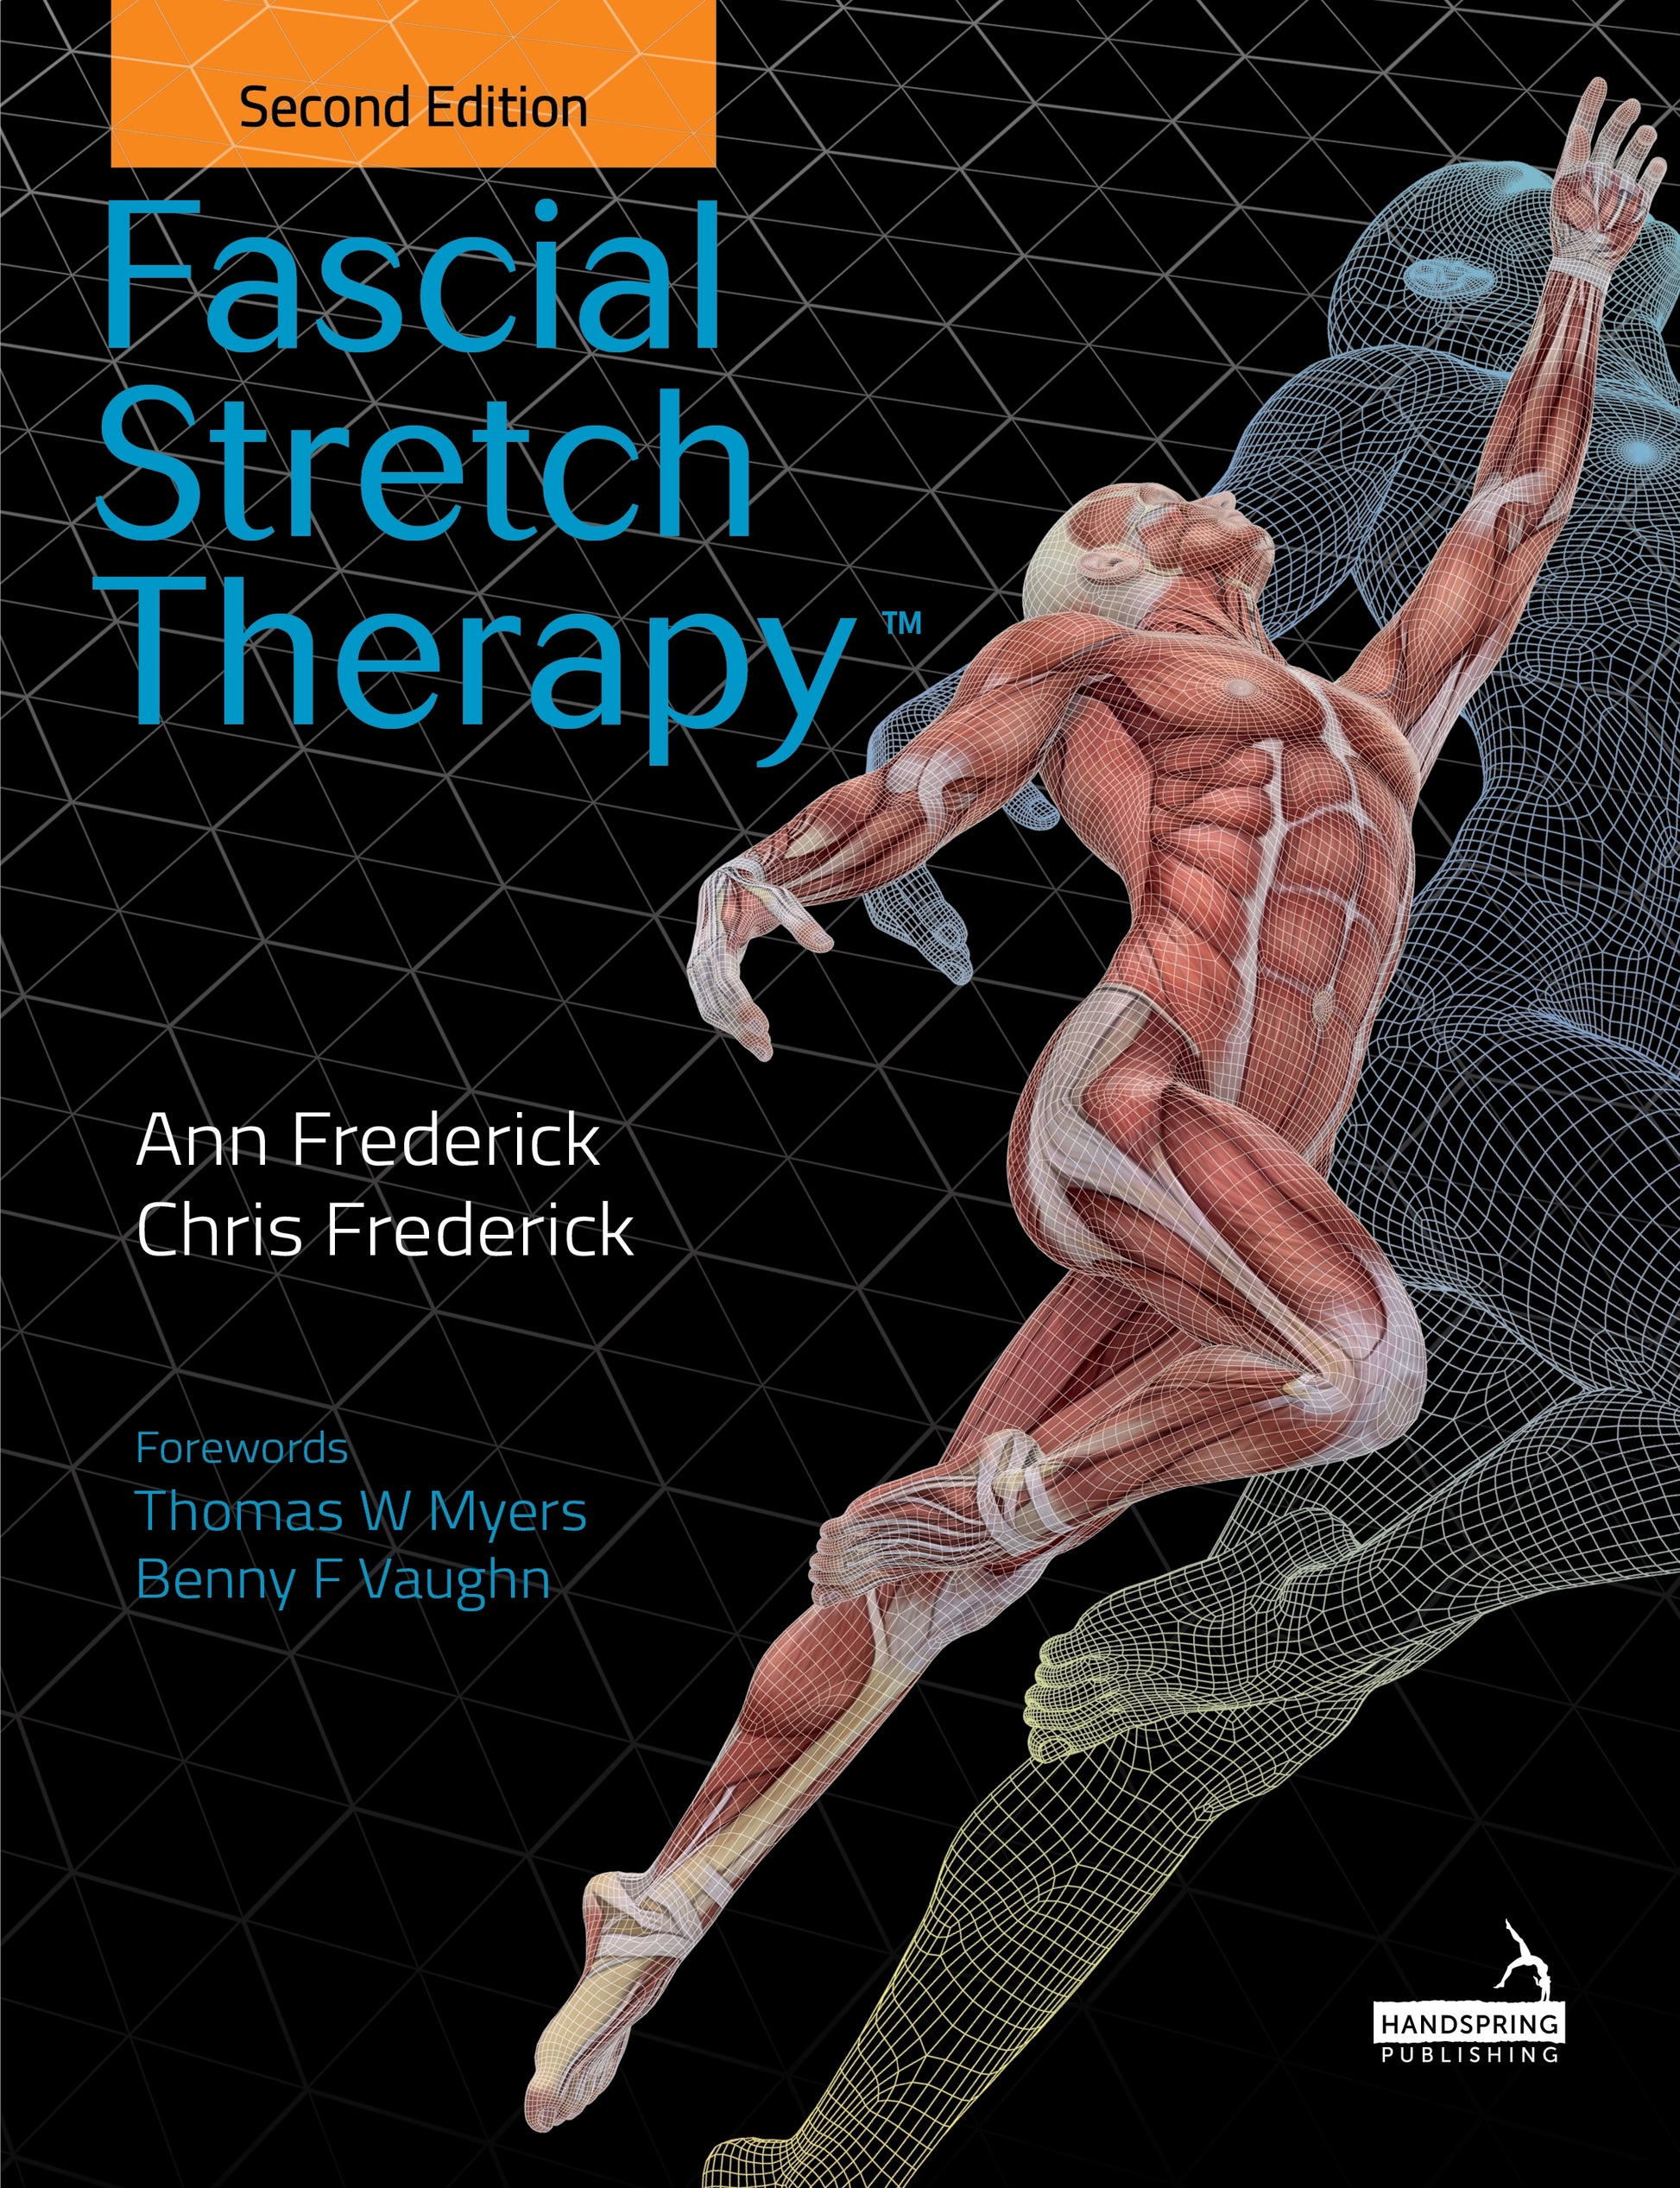 Fascial Stretch Therapy - Second Edition by Ann Frederick, Chris Frederick